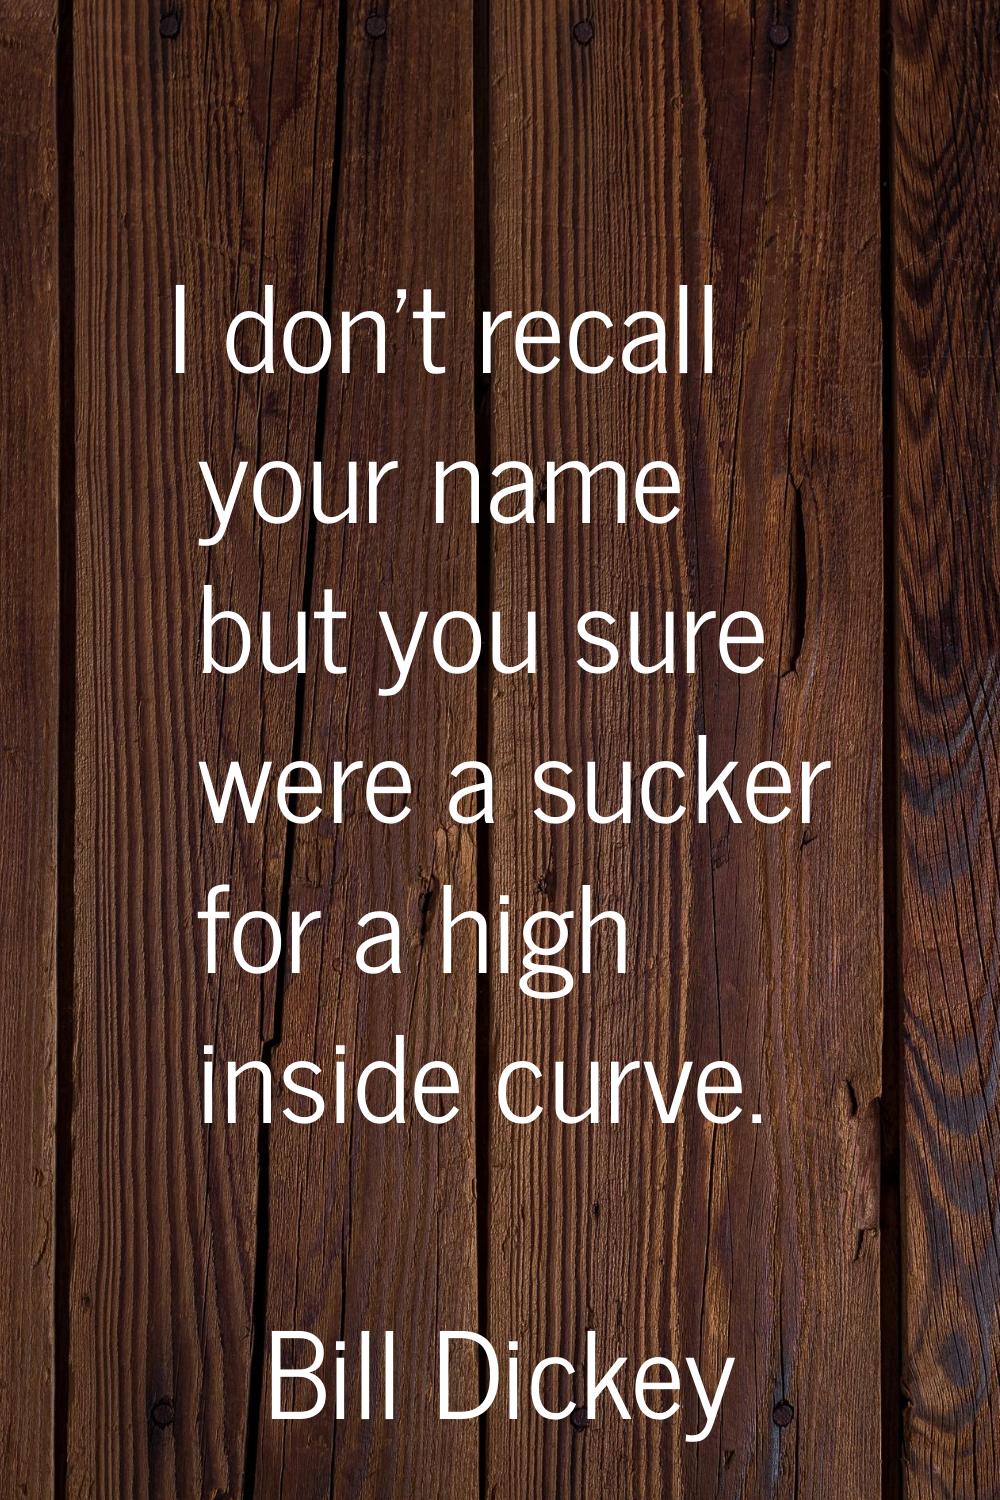 I don't recall your name but you sure were a sucker for a high inside curve.